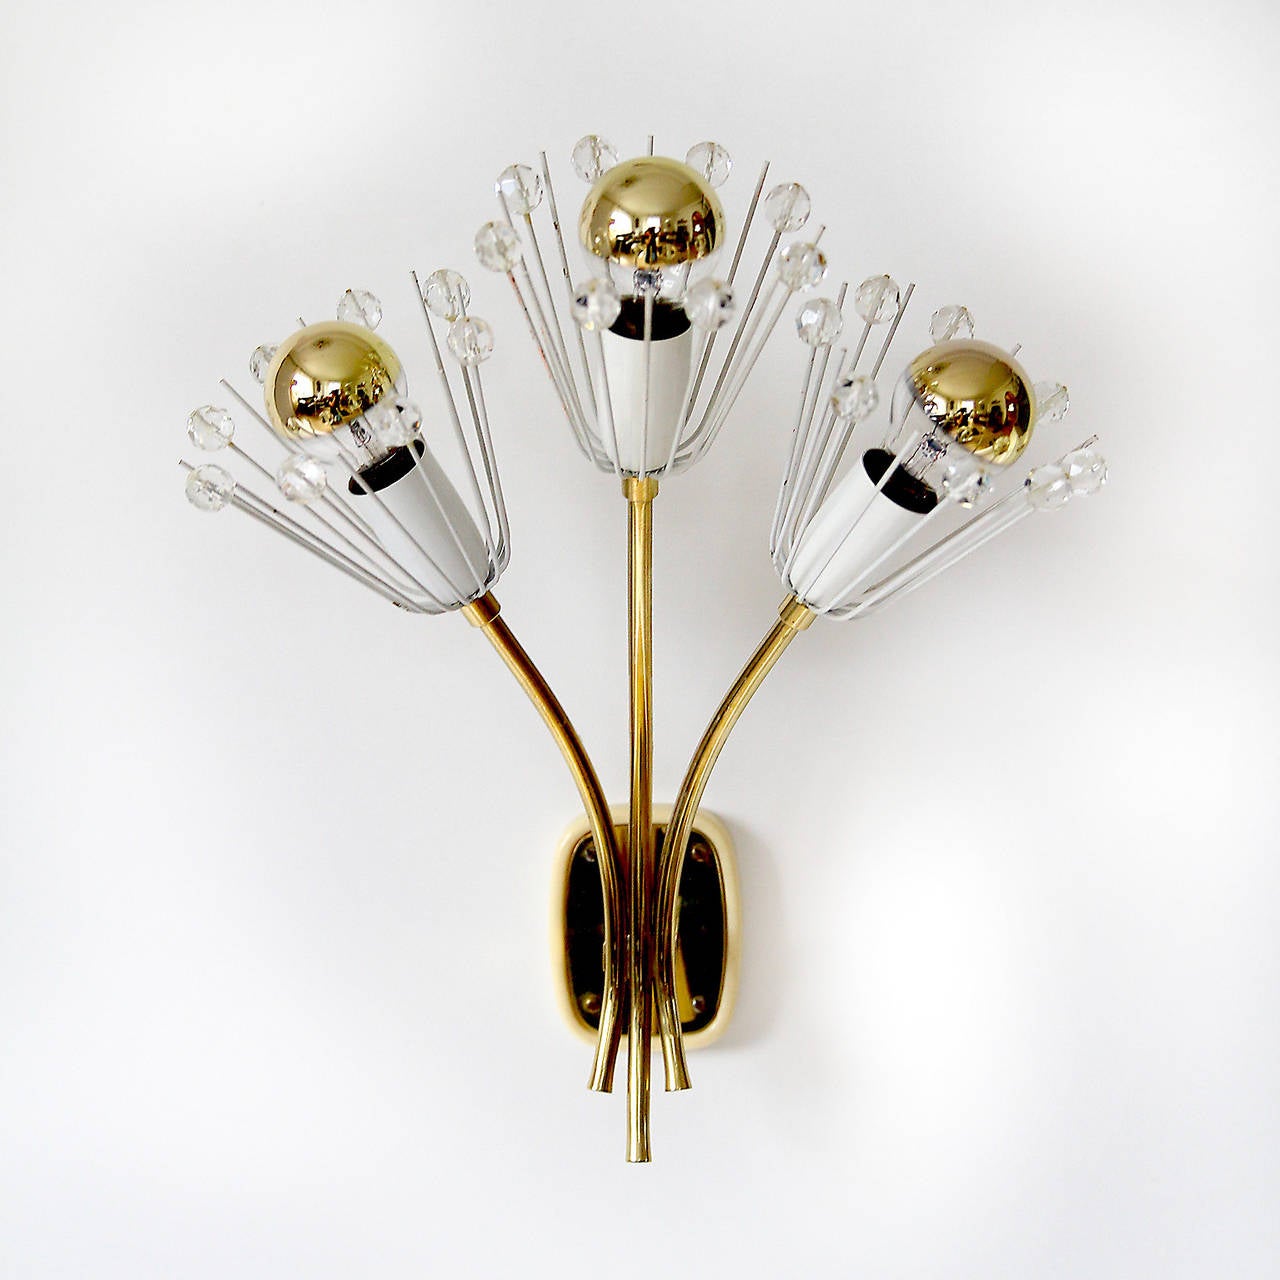 A charming Viennese pair of wall lights in the form of bunches of flowers by Emil Stejnar for Rupert Nikoll, Vienna Austria, manufactured in midcentury, circa 1950. 
The pieces are made of brass, white painted metal and handcut crystal glass. They